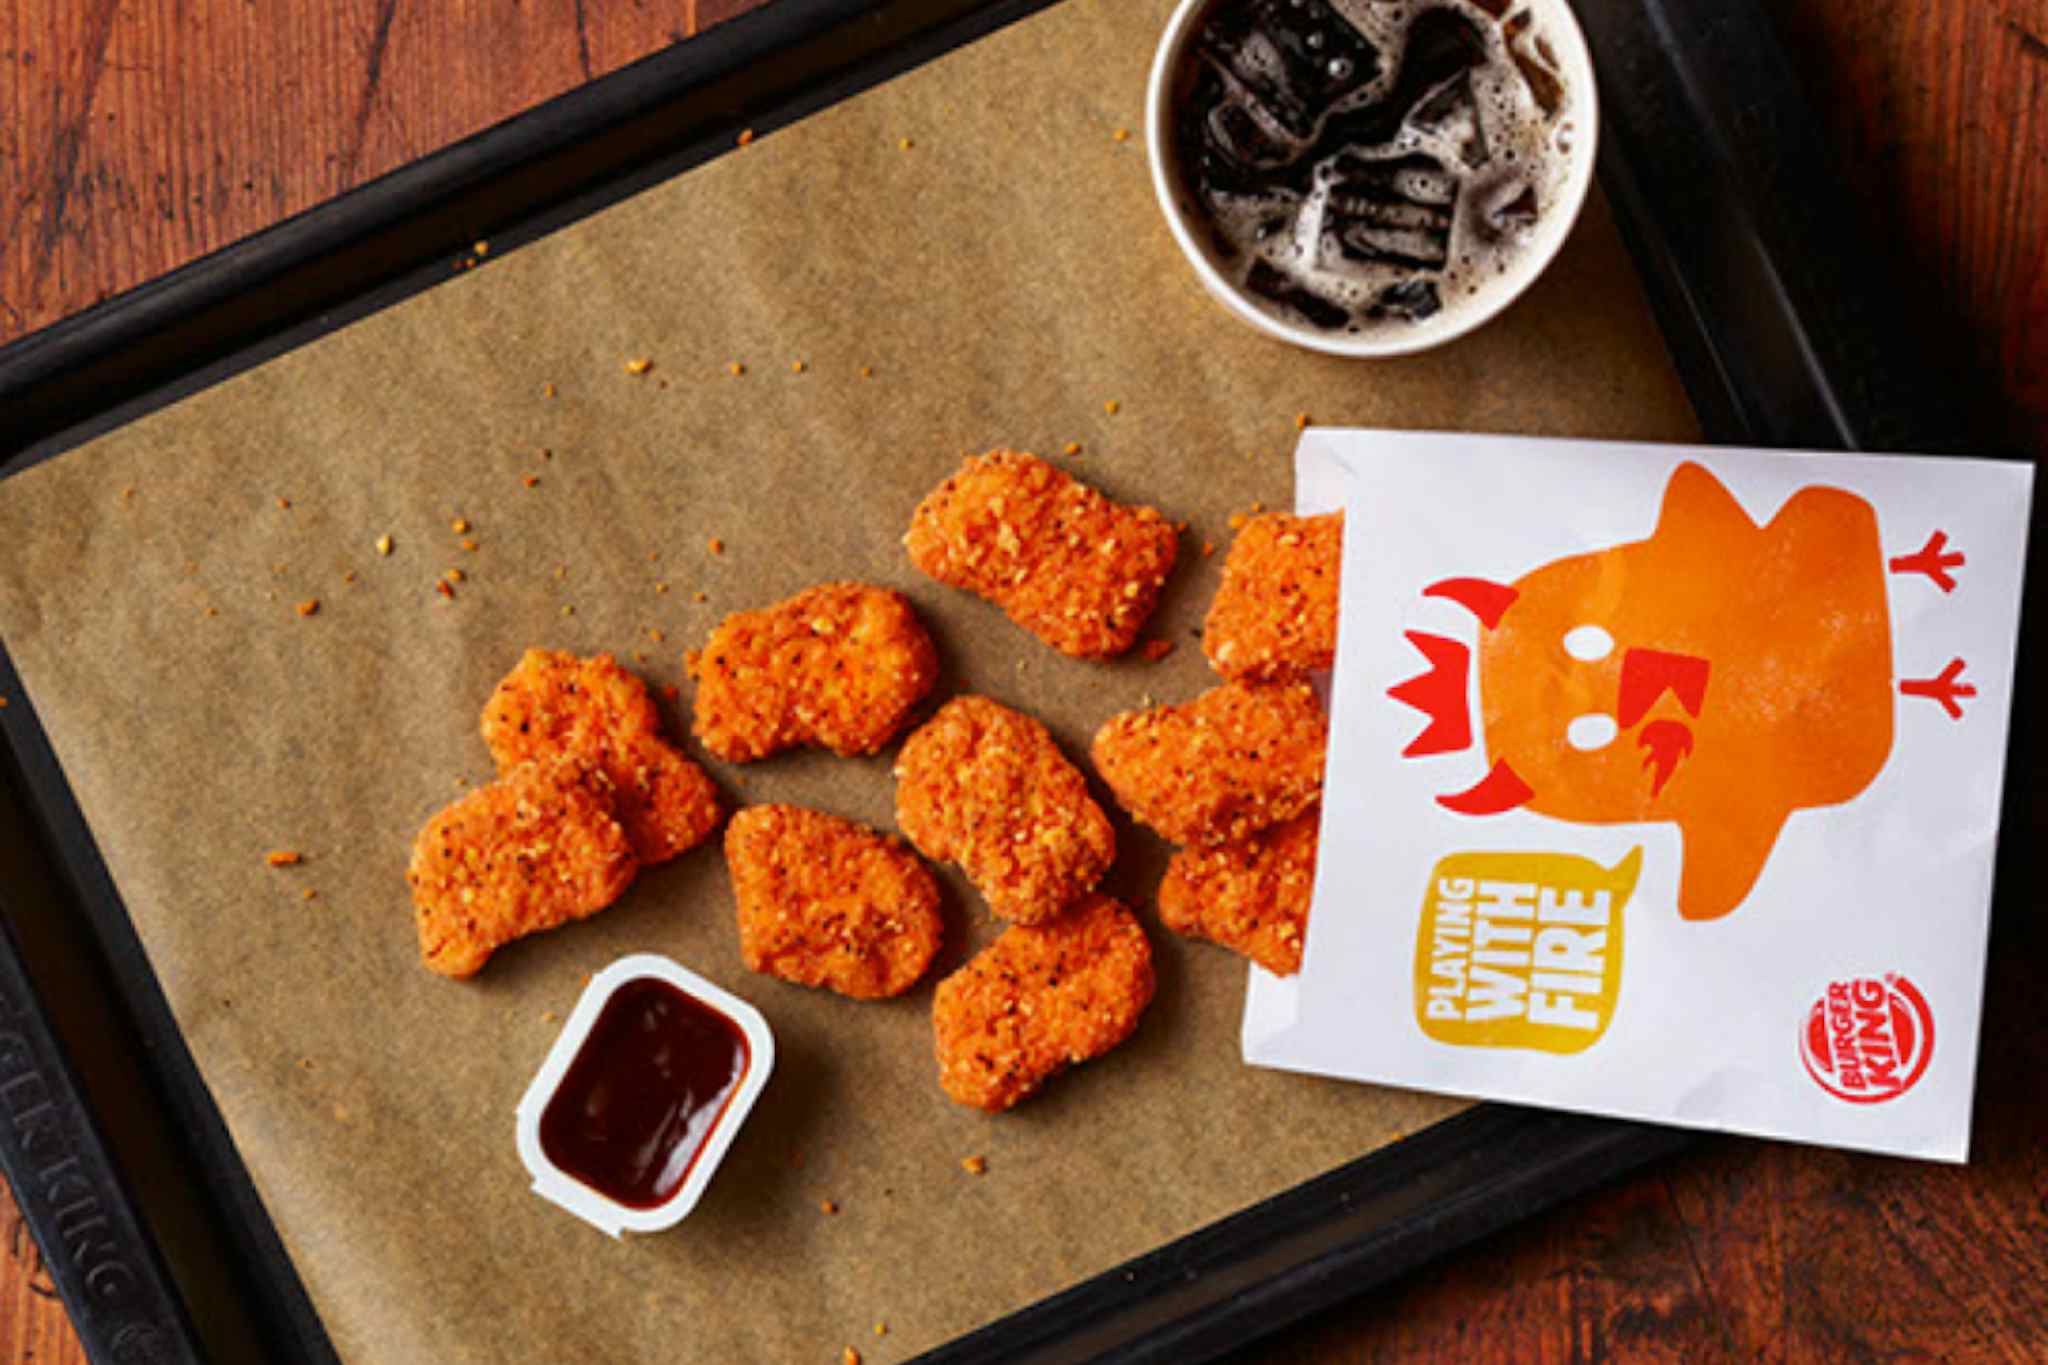 Delicious and fiery spicy chicken nuggets from Burger King of Idaho Falls, Idaho.